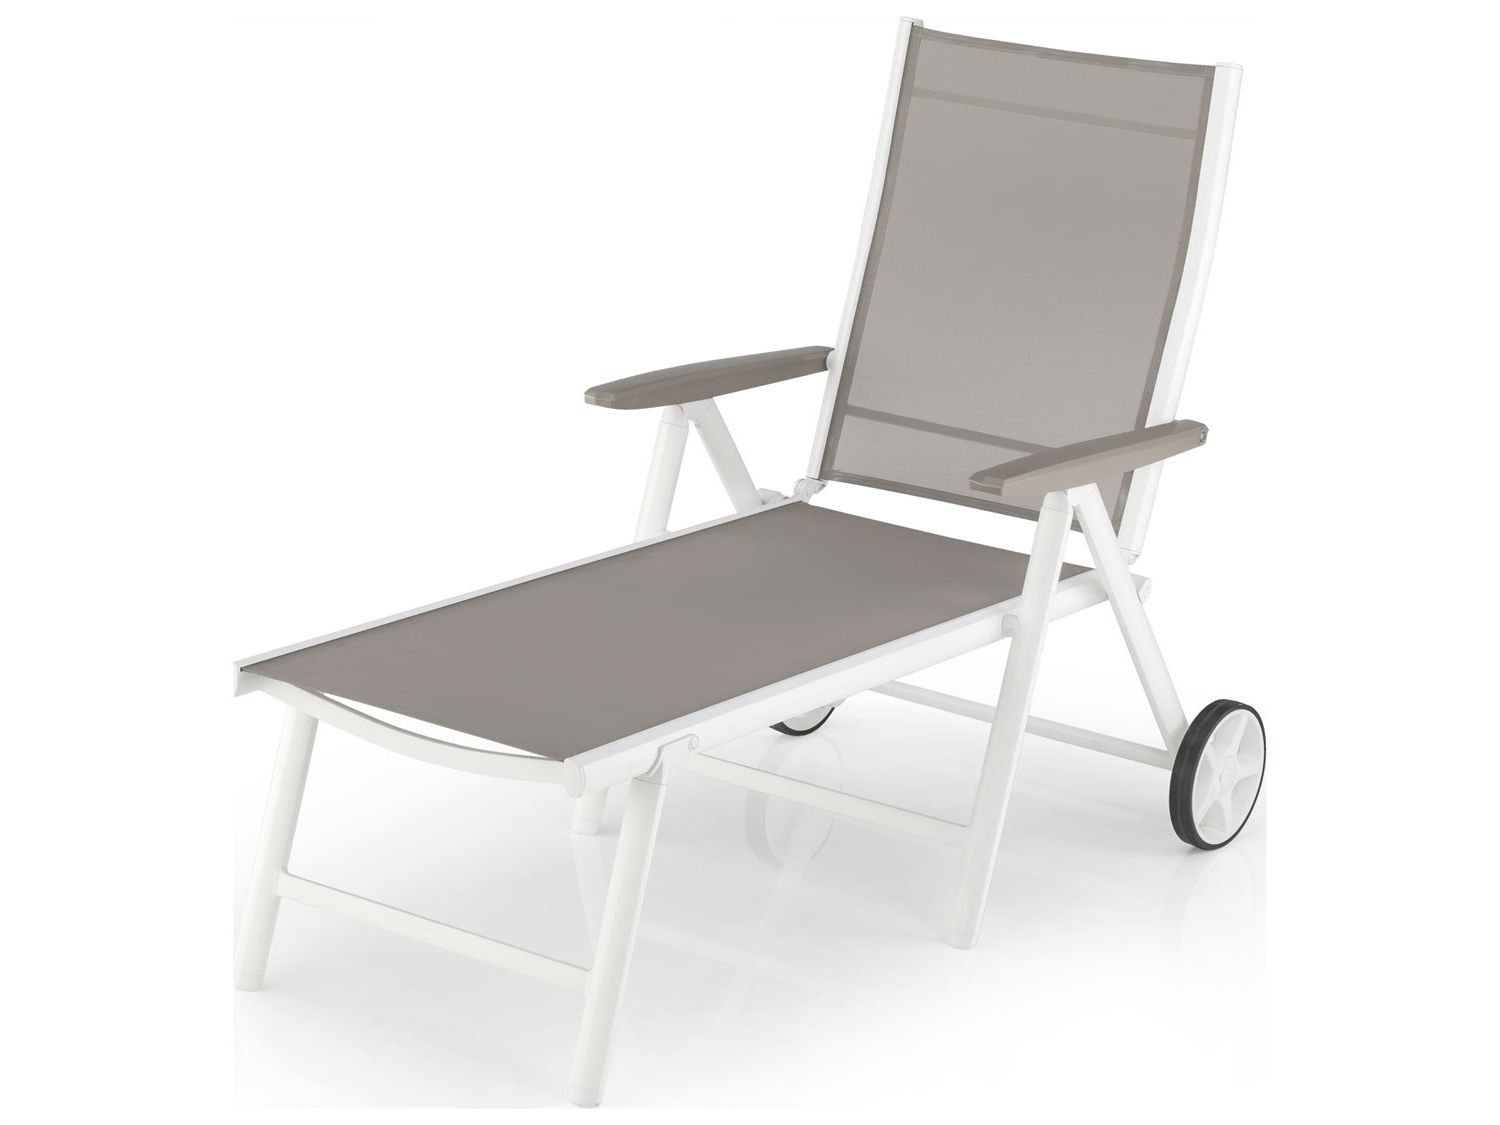 Most Current Kettler Vista Aluminum Multi Position Chaise Lounge Throughout Multi Position Chaise Lounges (View 15 of 25)